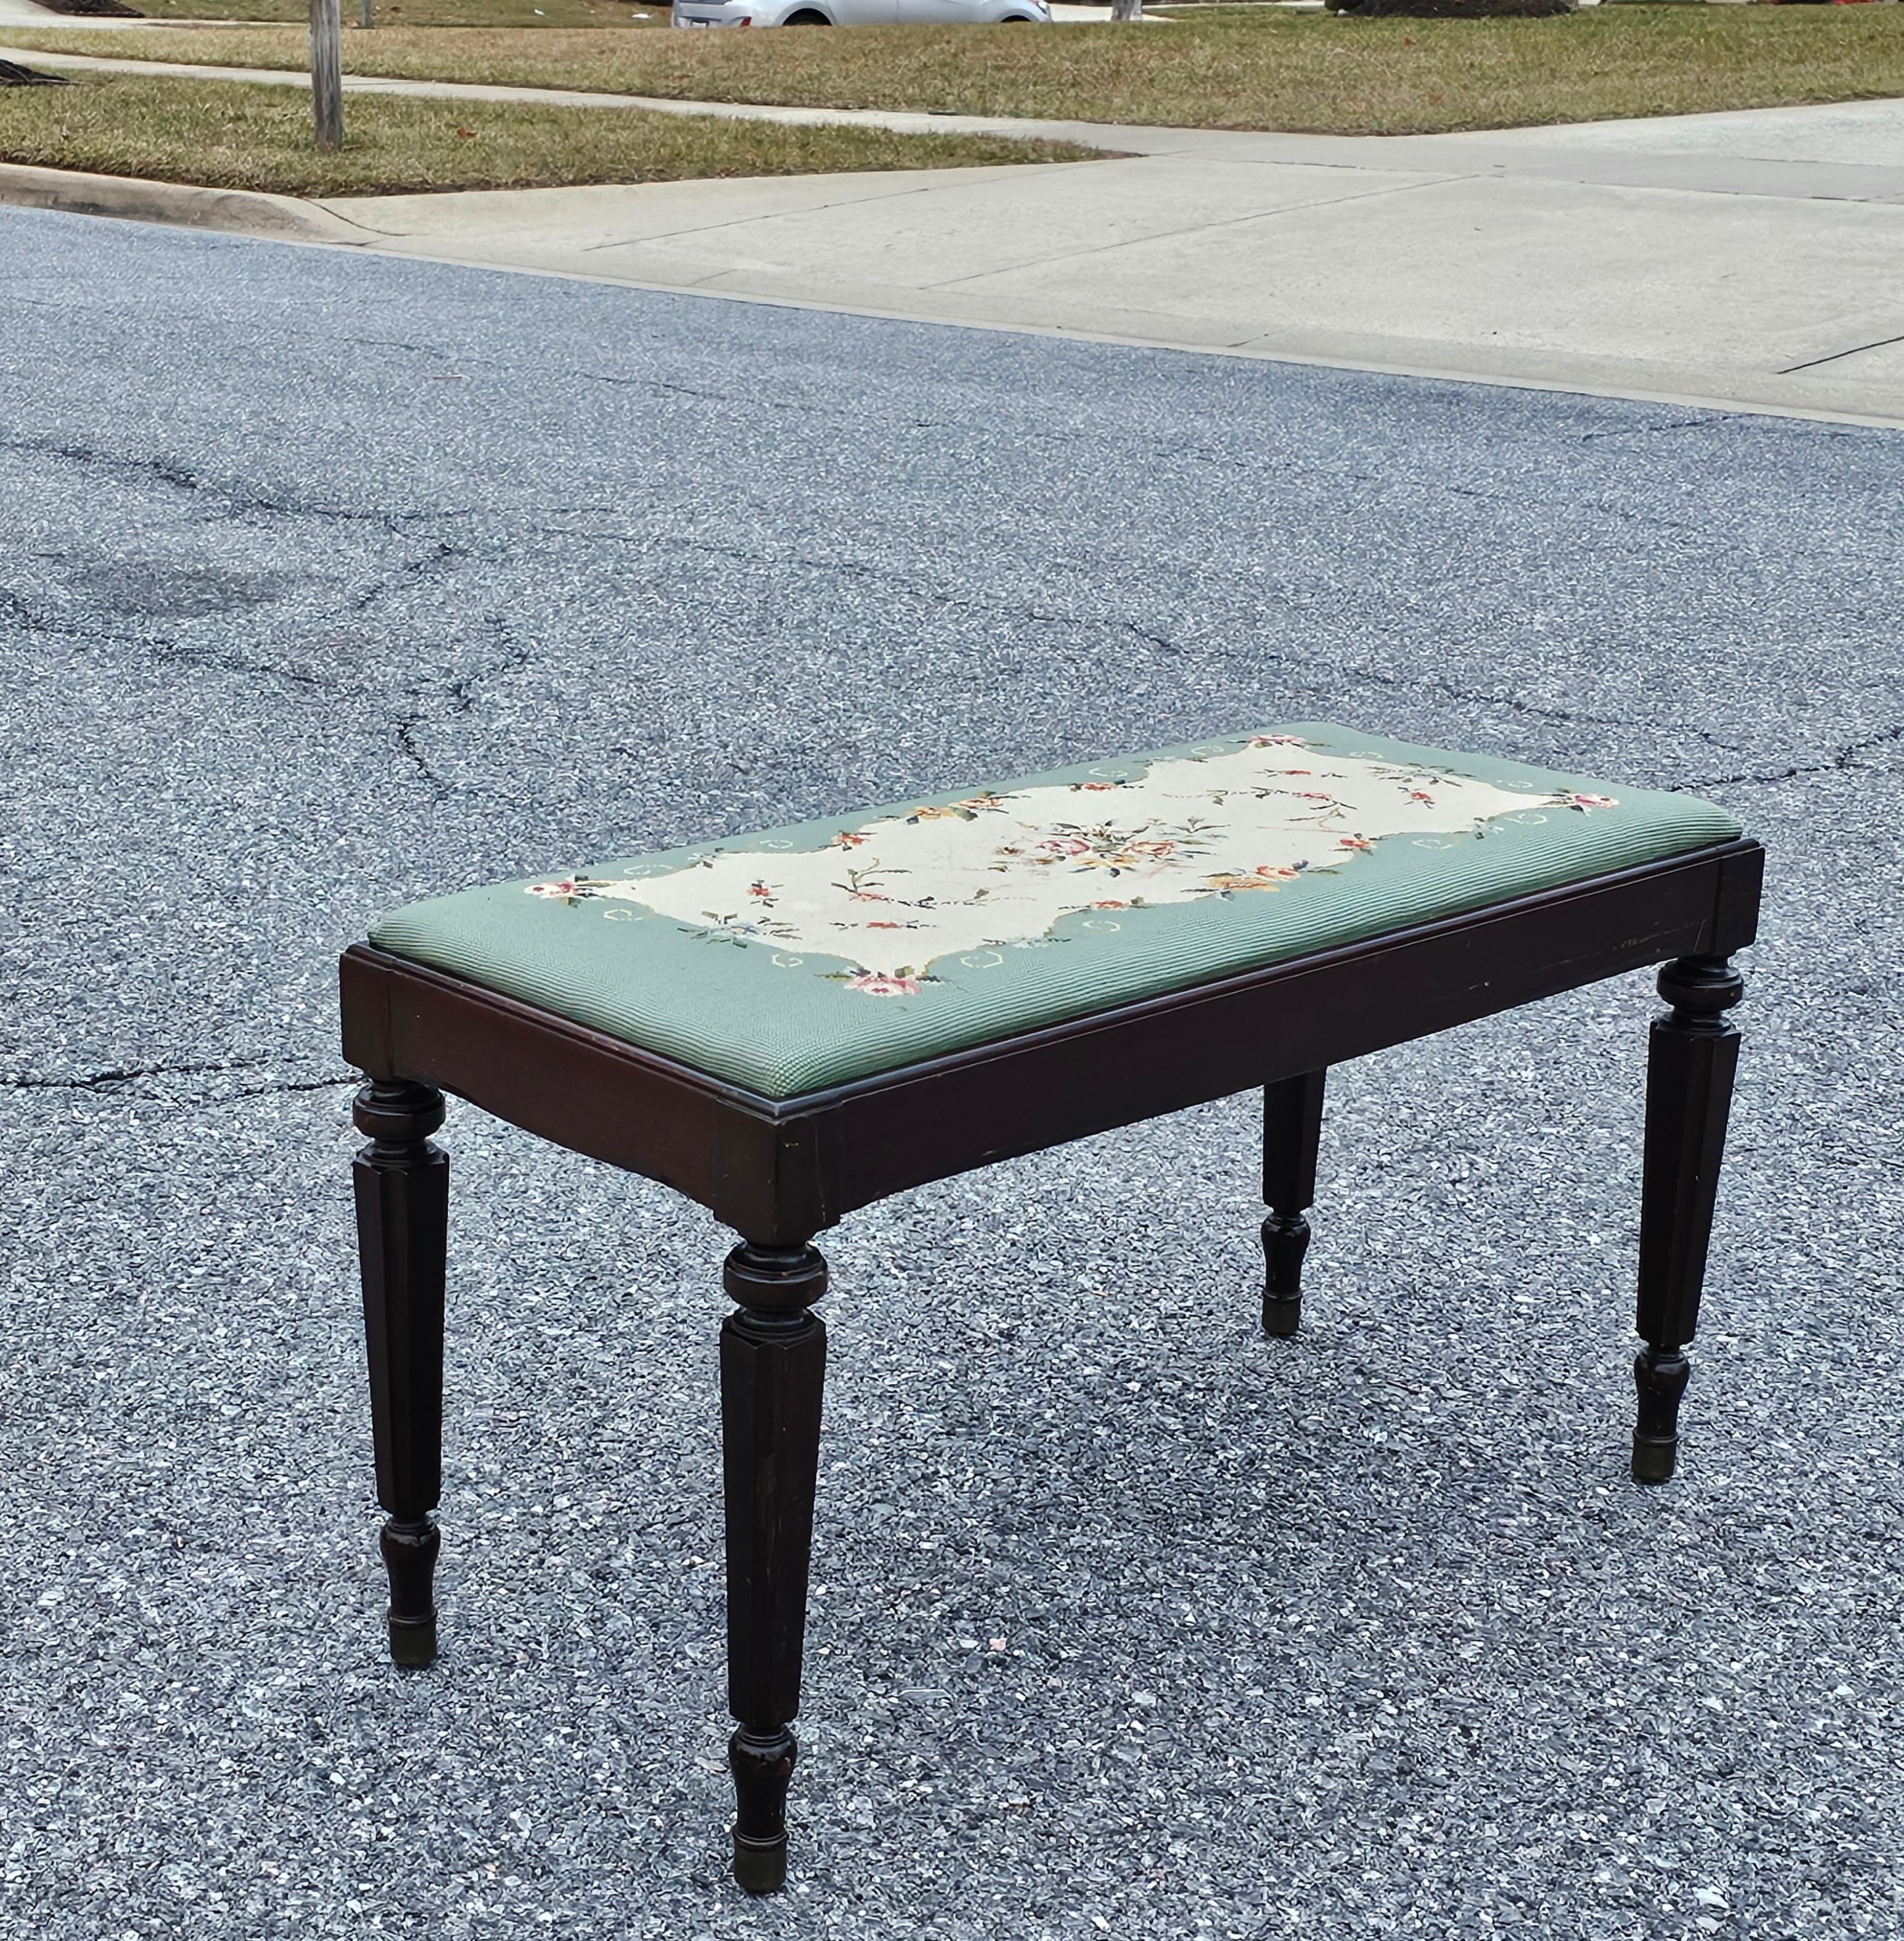 Mid 20th Century Mahogany and Needlepoint Upholstered Storage Bench In Good Condition For Sale In Germantown, MD